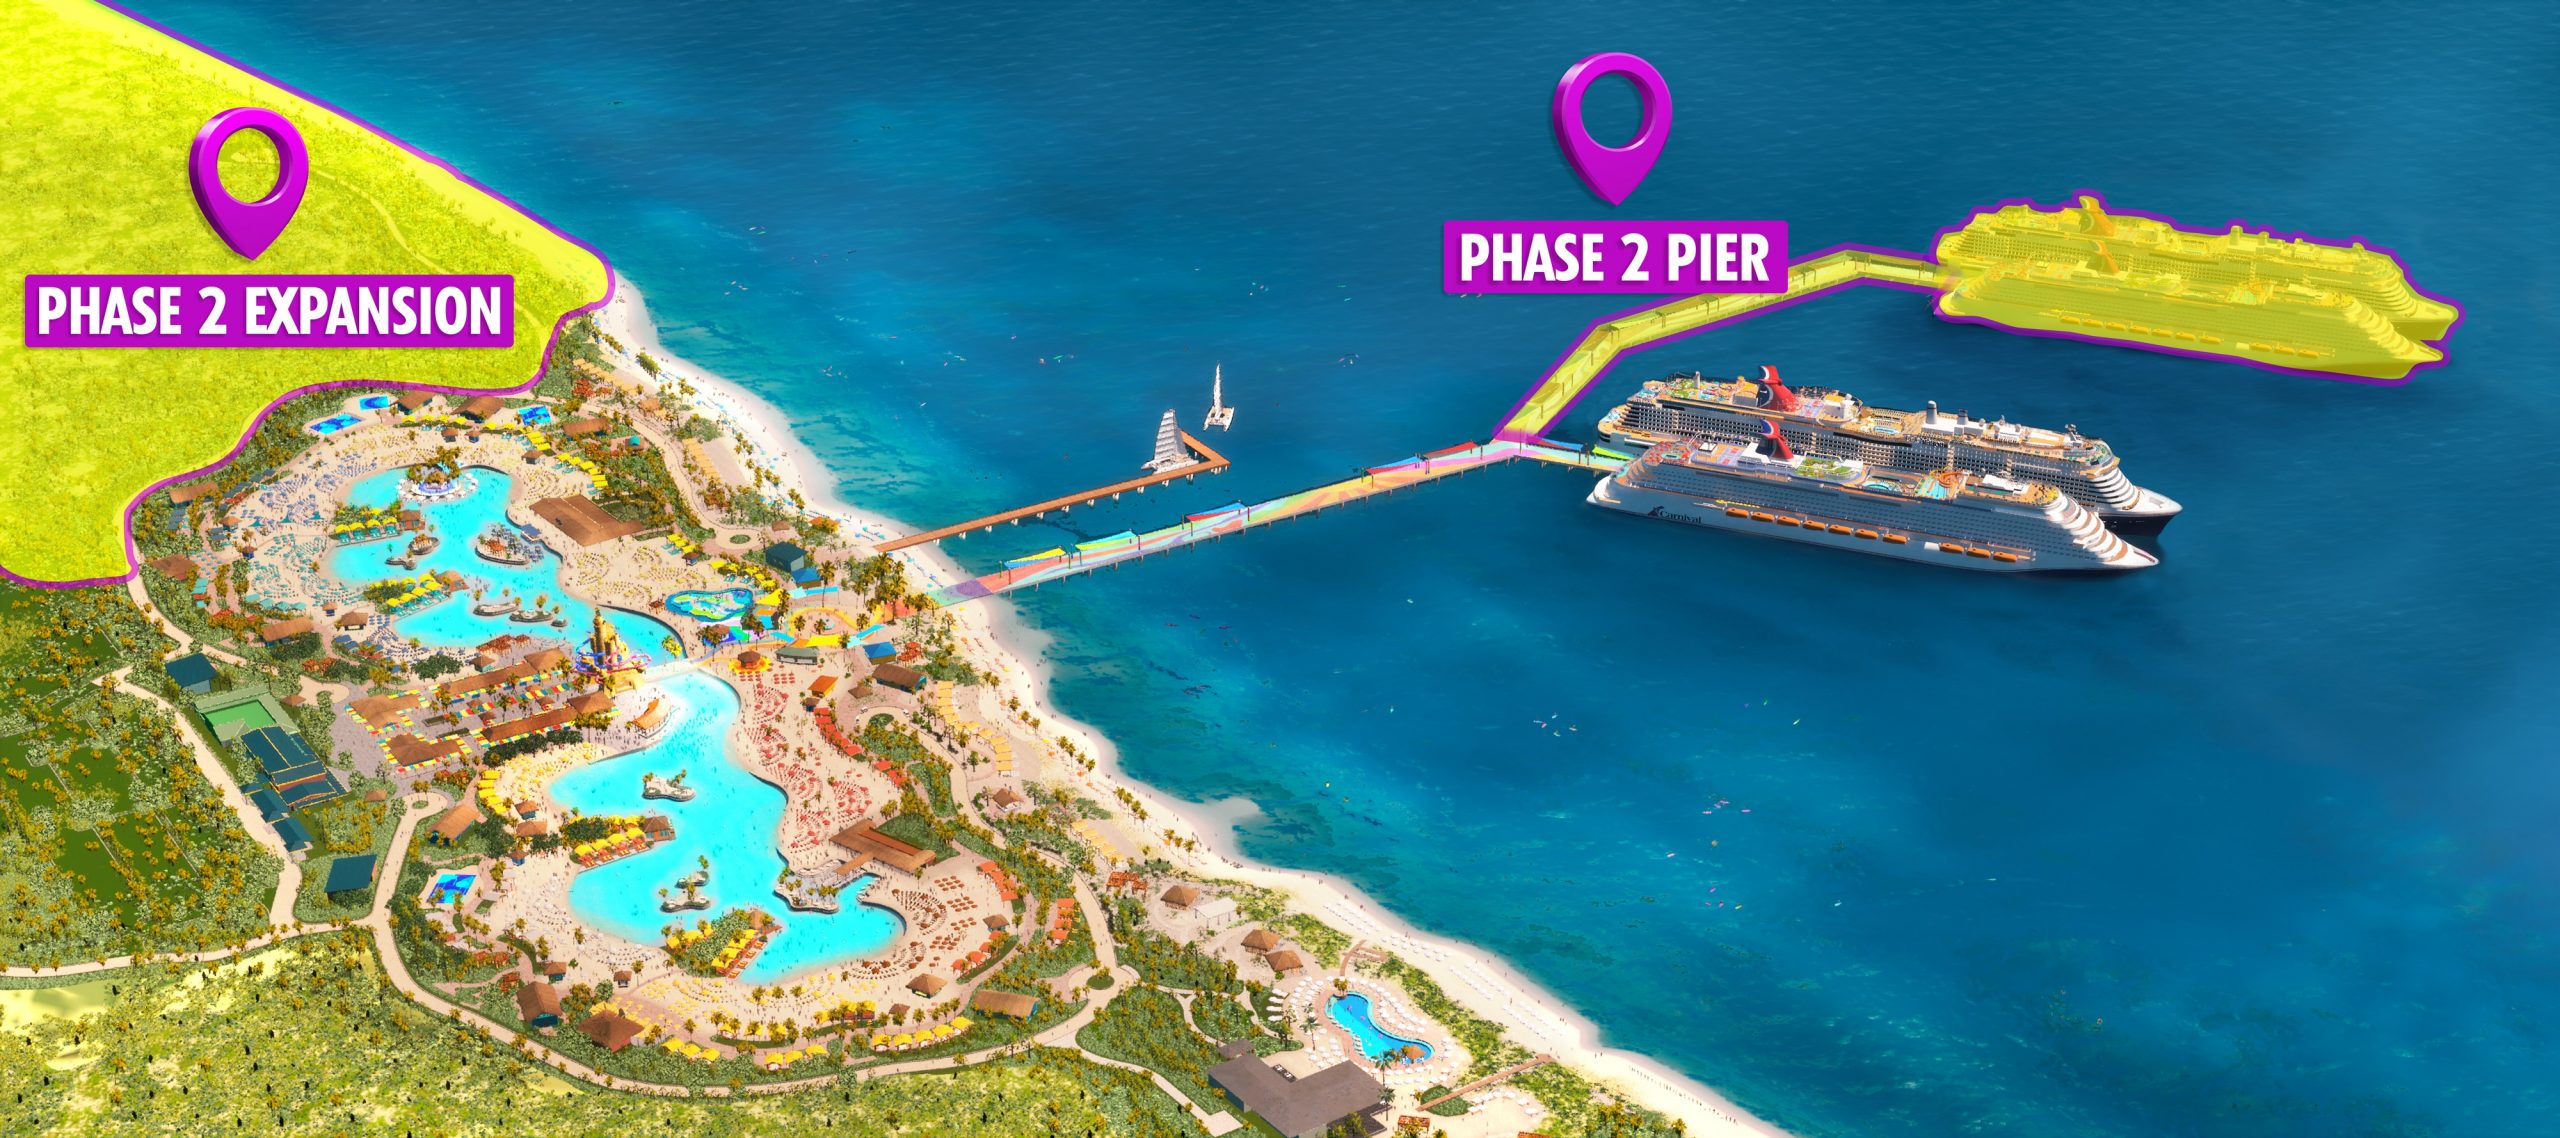 Carnival Corporation Announces New Pier Extension for Celebration Key in the Bahamas